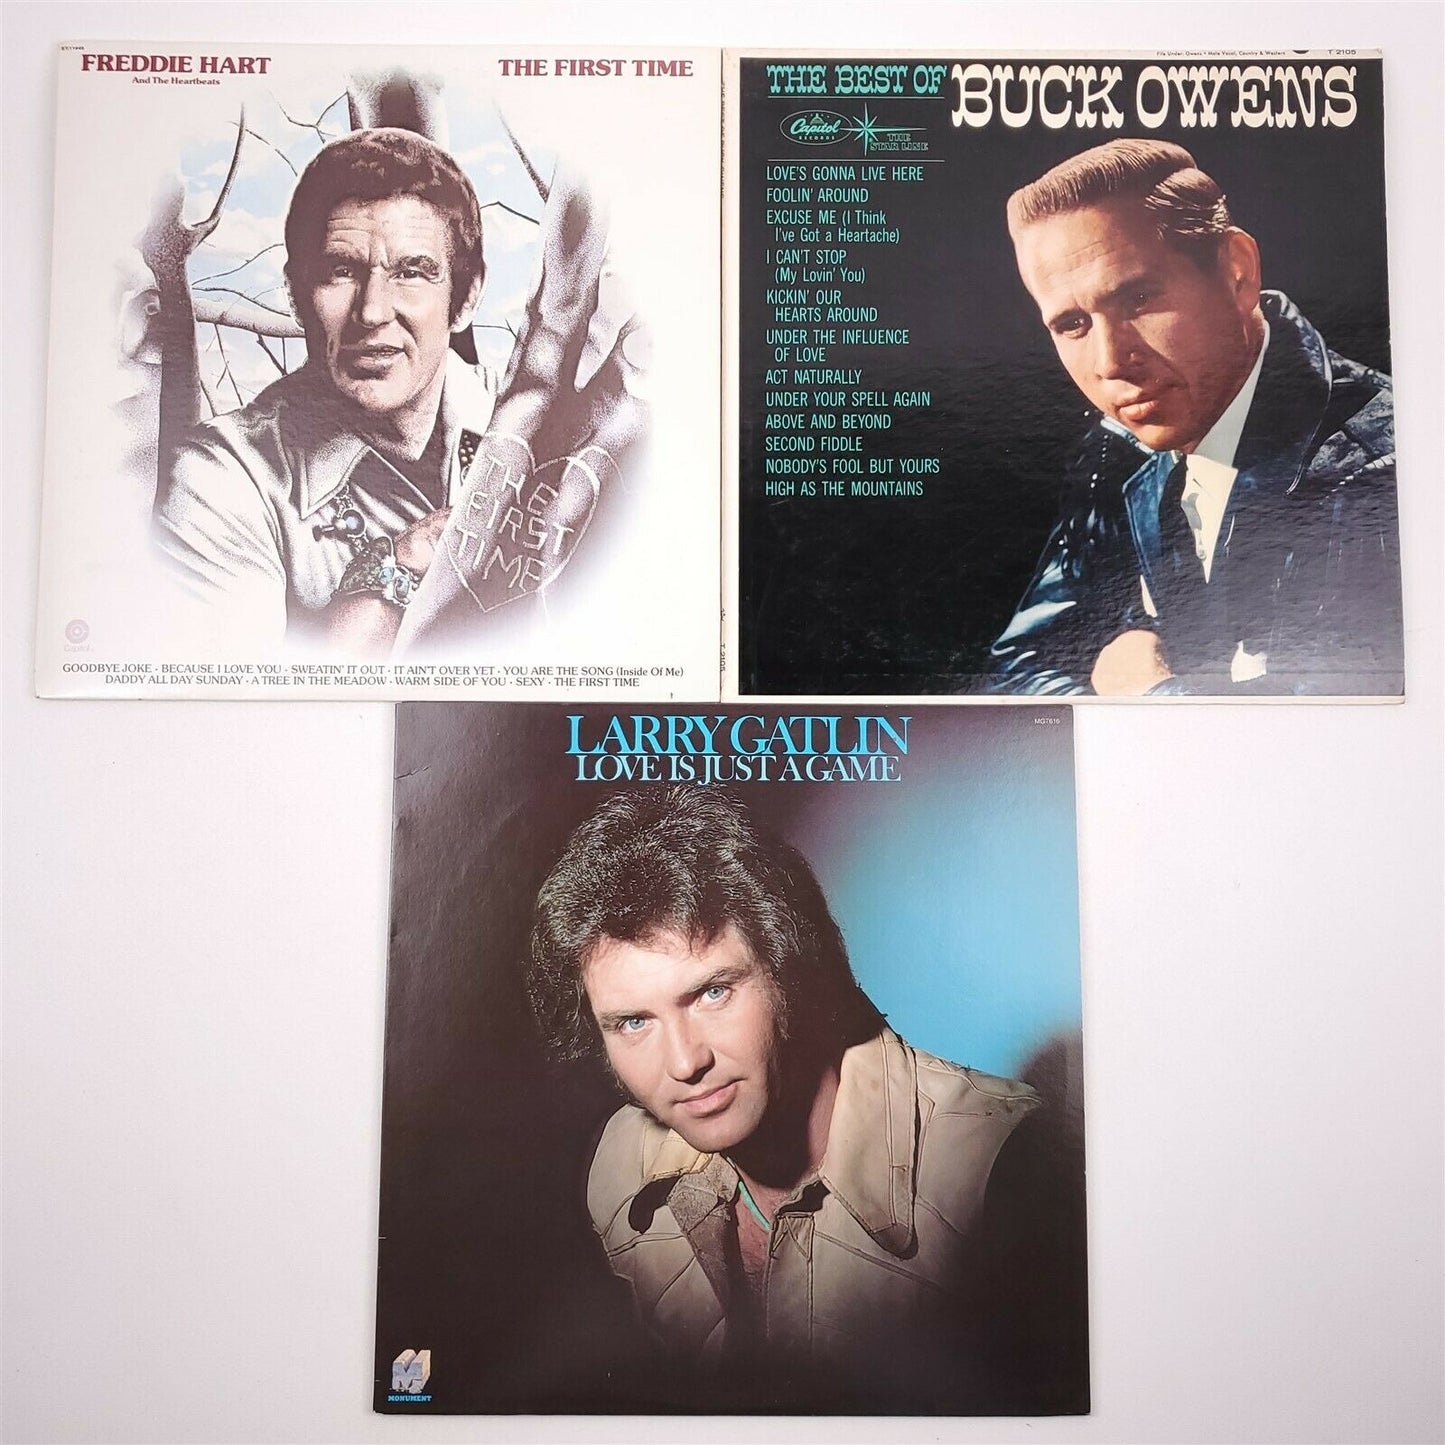 Men of Country Western 1970s 9 Records Buck Owens, Don Williams, Bill Anderson